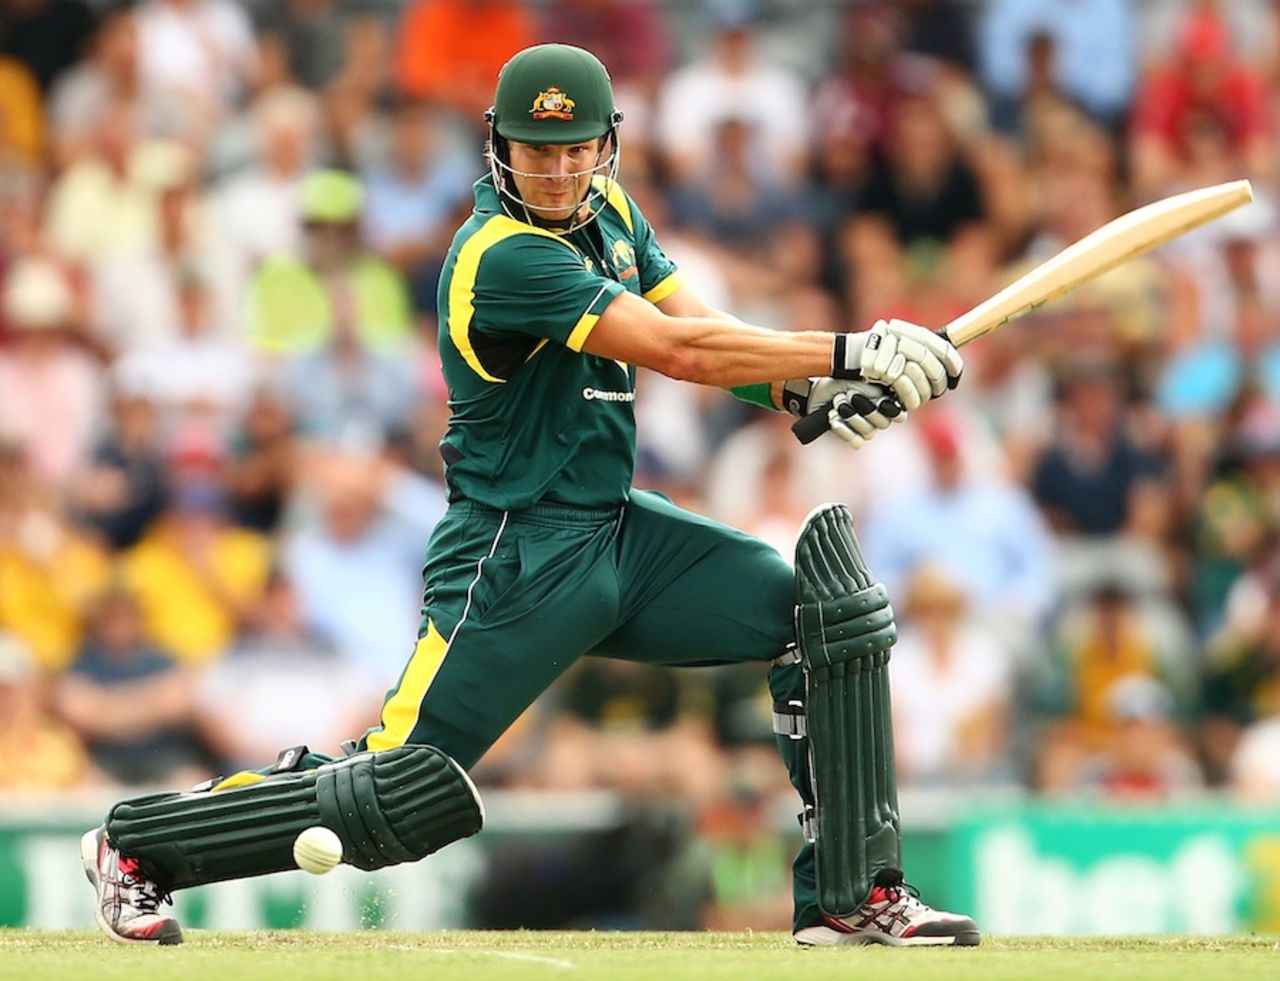 Shane Watson cuts during his innings of 122, Australia v West Indies, 3rd ODI, Canberra, February 6, 2013